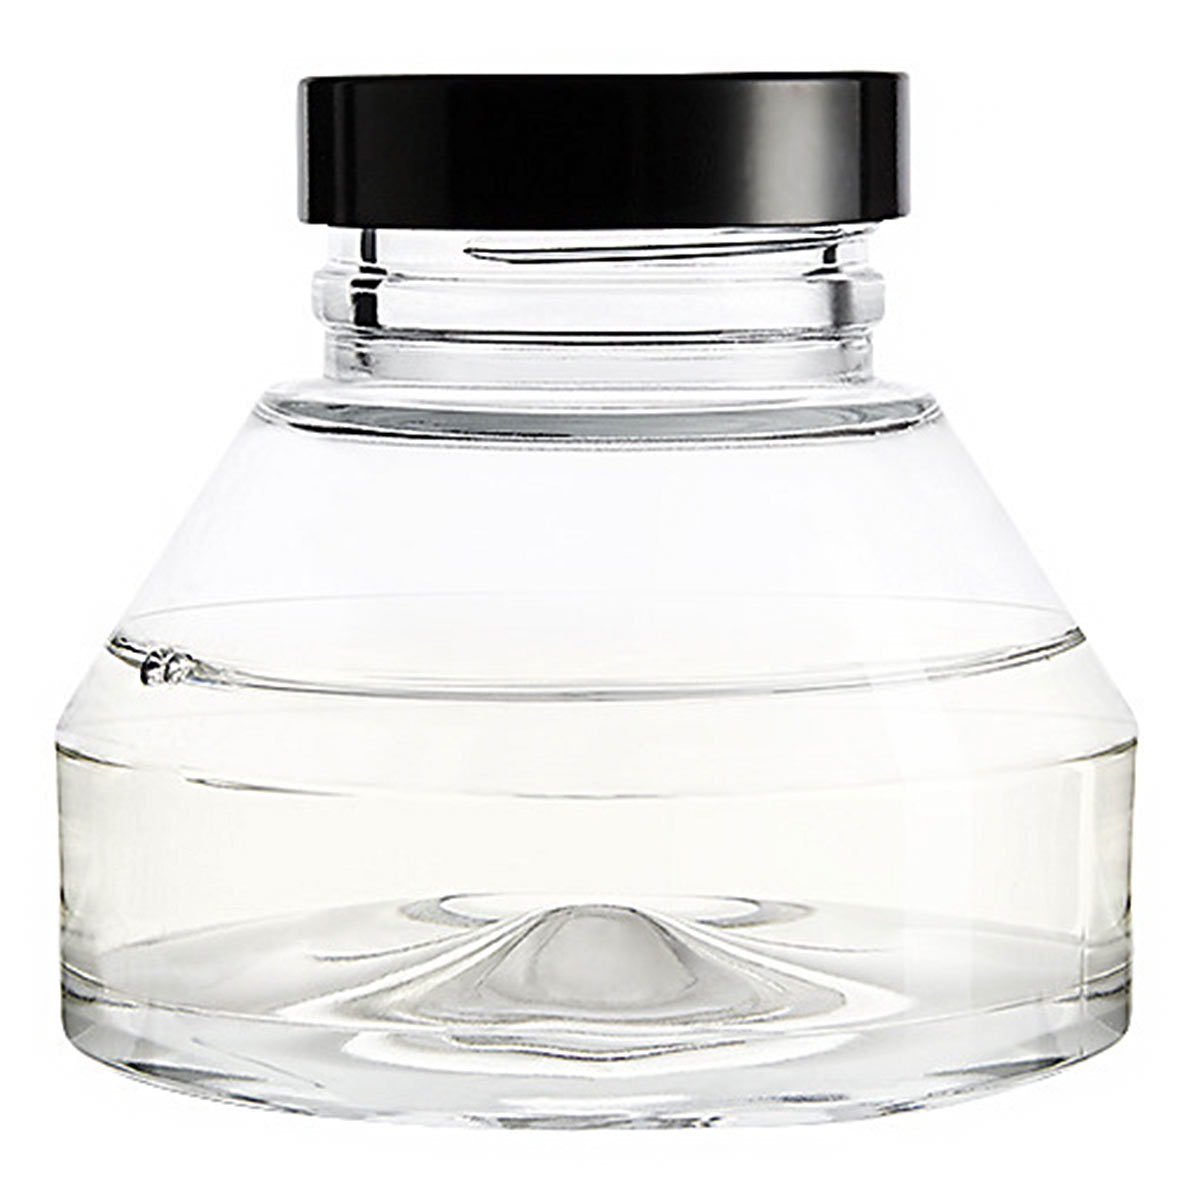 Primary image of Baies Diffuser Refill